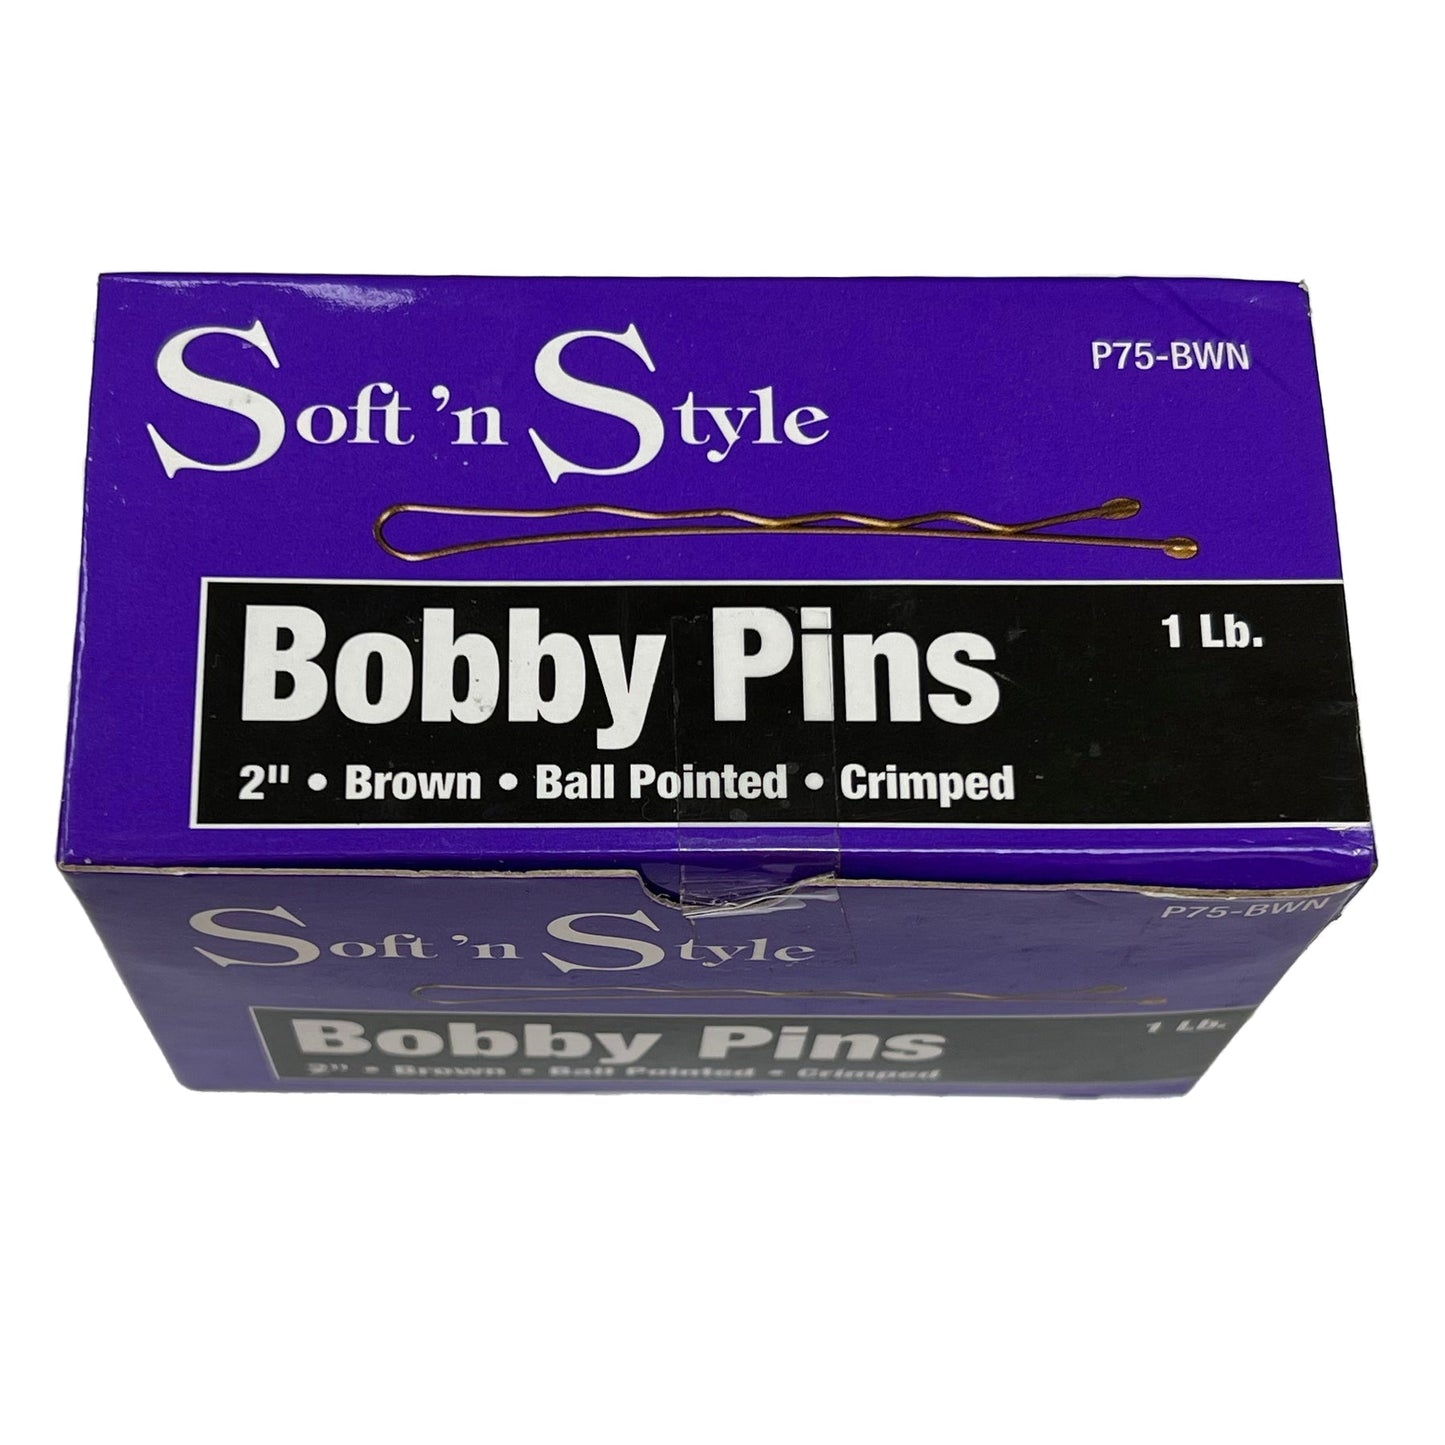 1 Lb. Bobby Pins | 2" | Ball Pointed | Crimped | SOFT N STYLE HAIR COLORING ACCESSORIES SOFT N STYLE Brown 